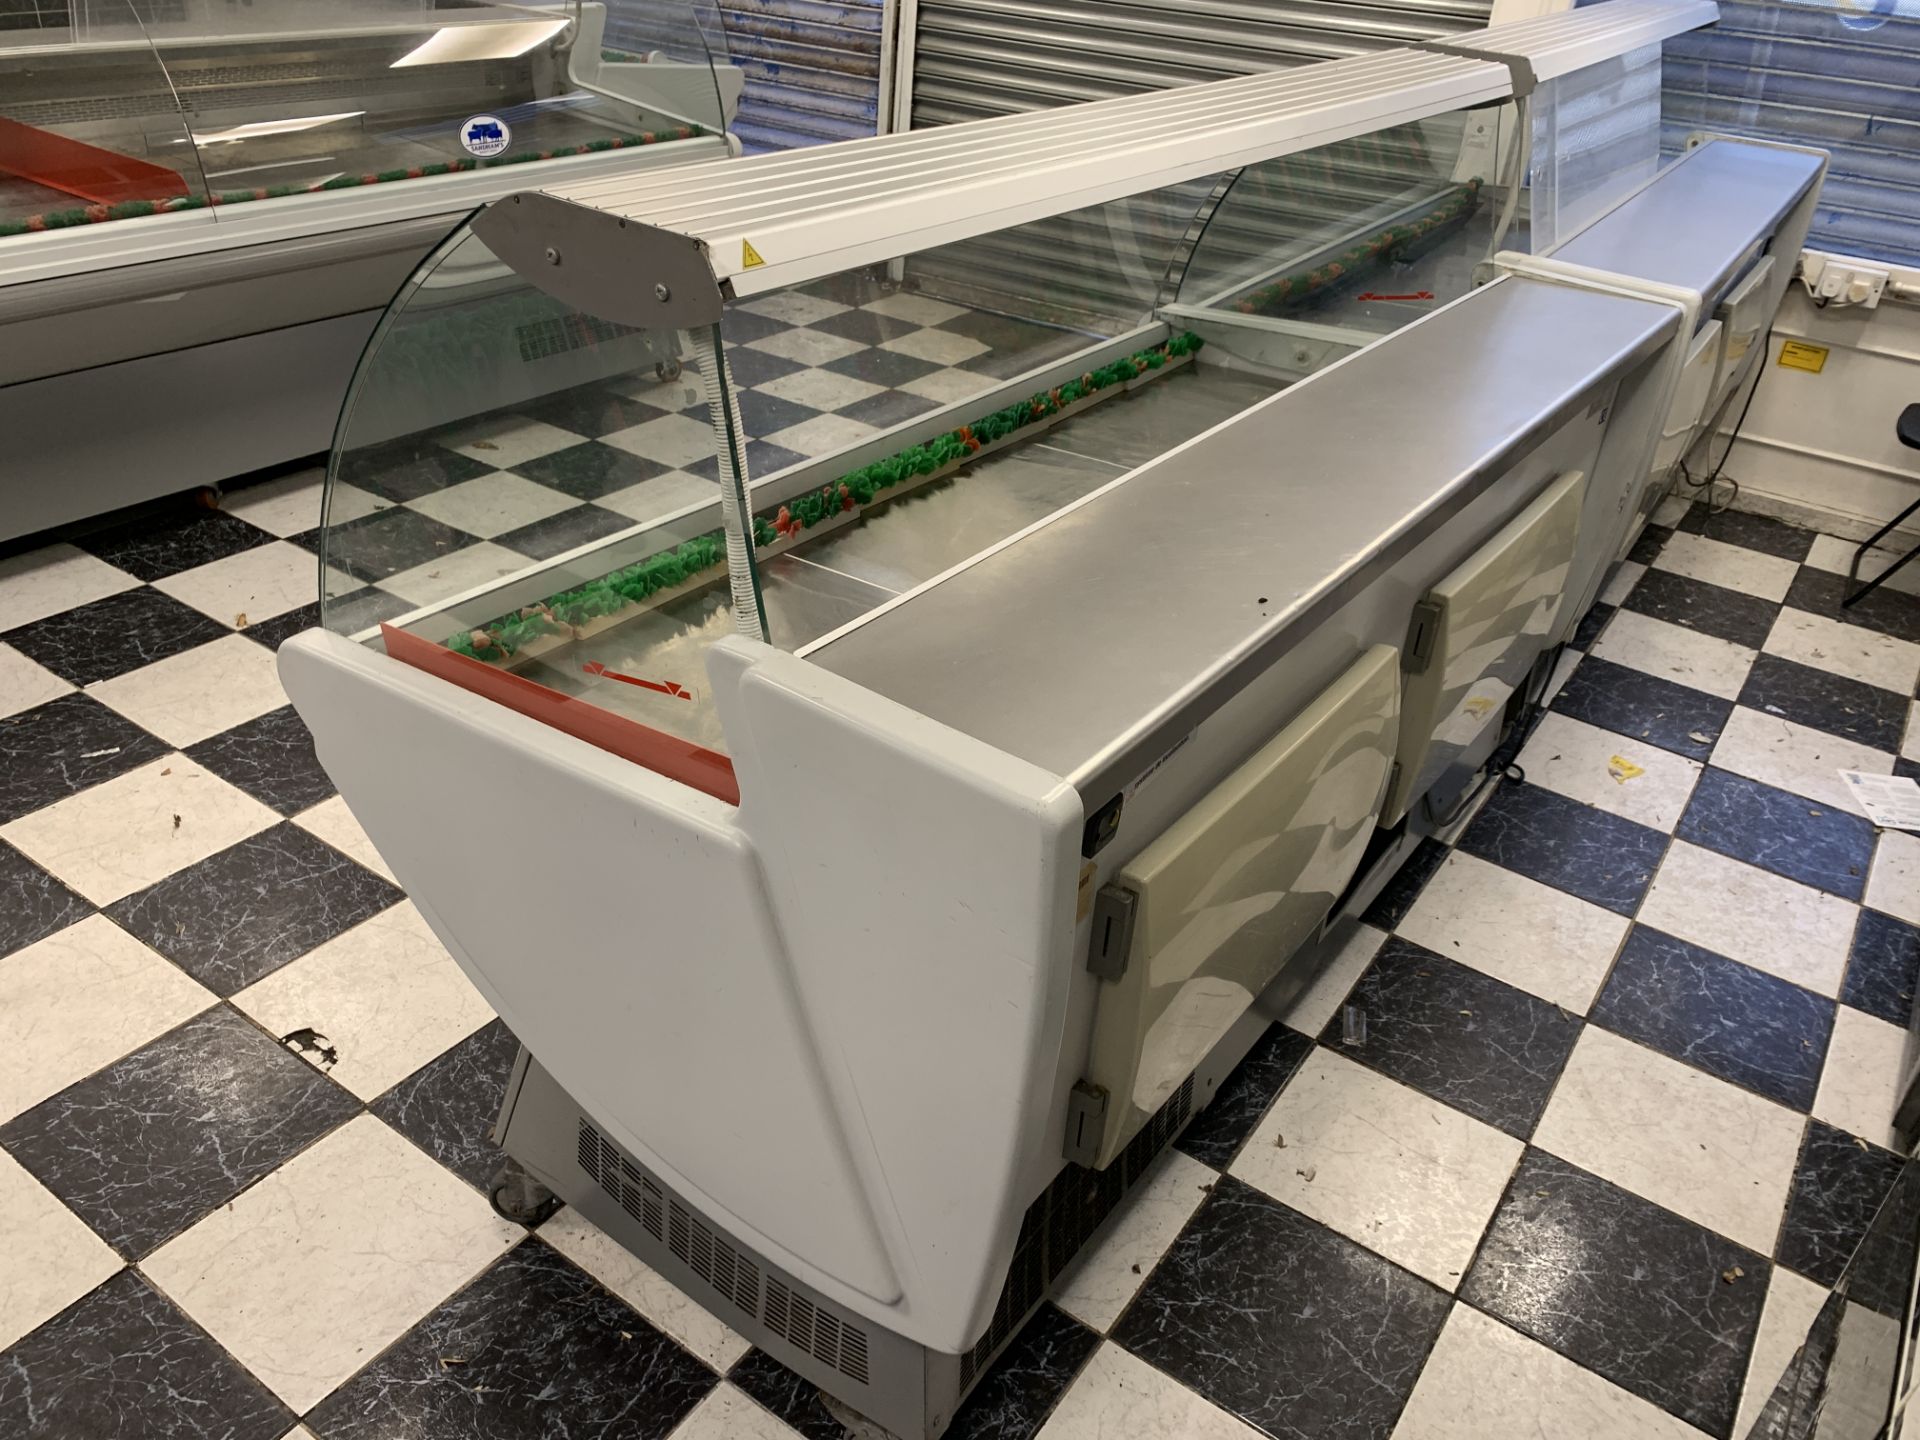 Lowe Mobile Refrigerated Display Counter on Castor Wheels 1880 x 1000 x 1350 mm (display area 1.26m - Image 2 of 3